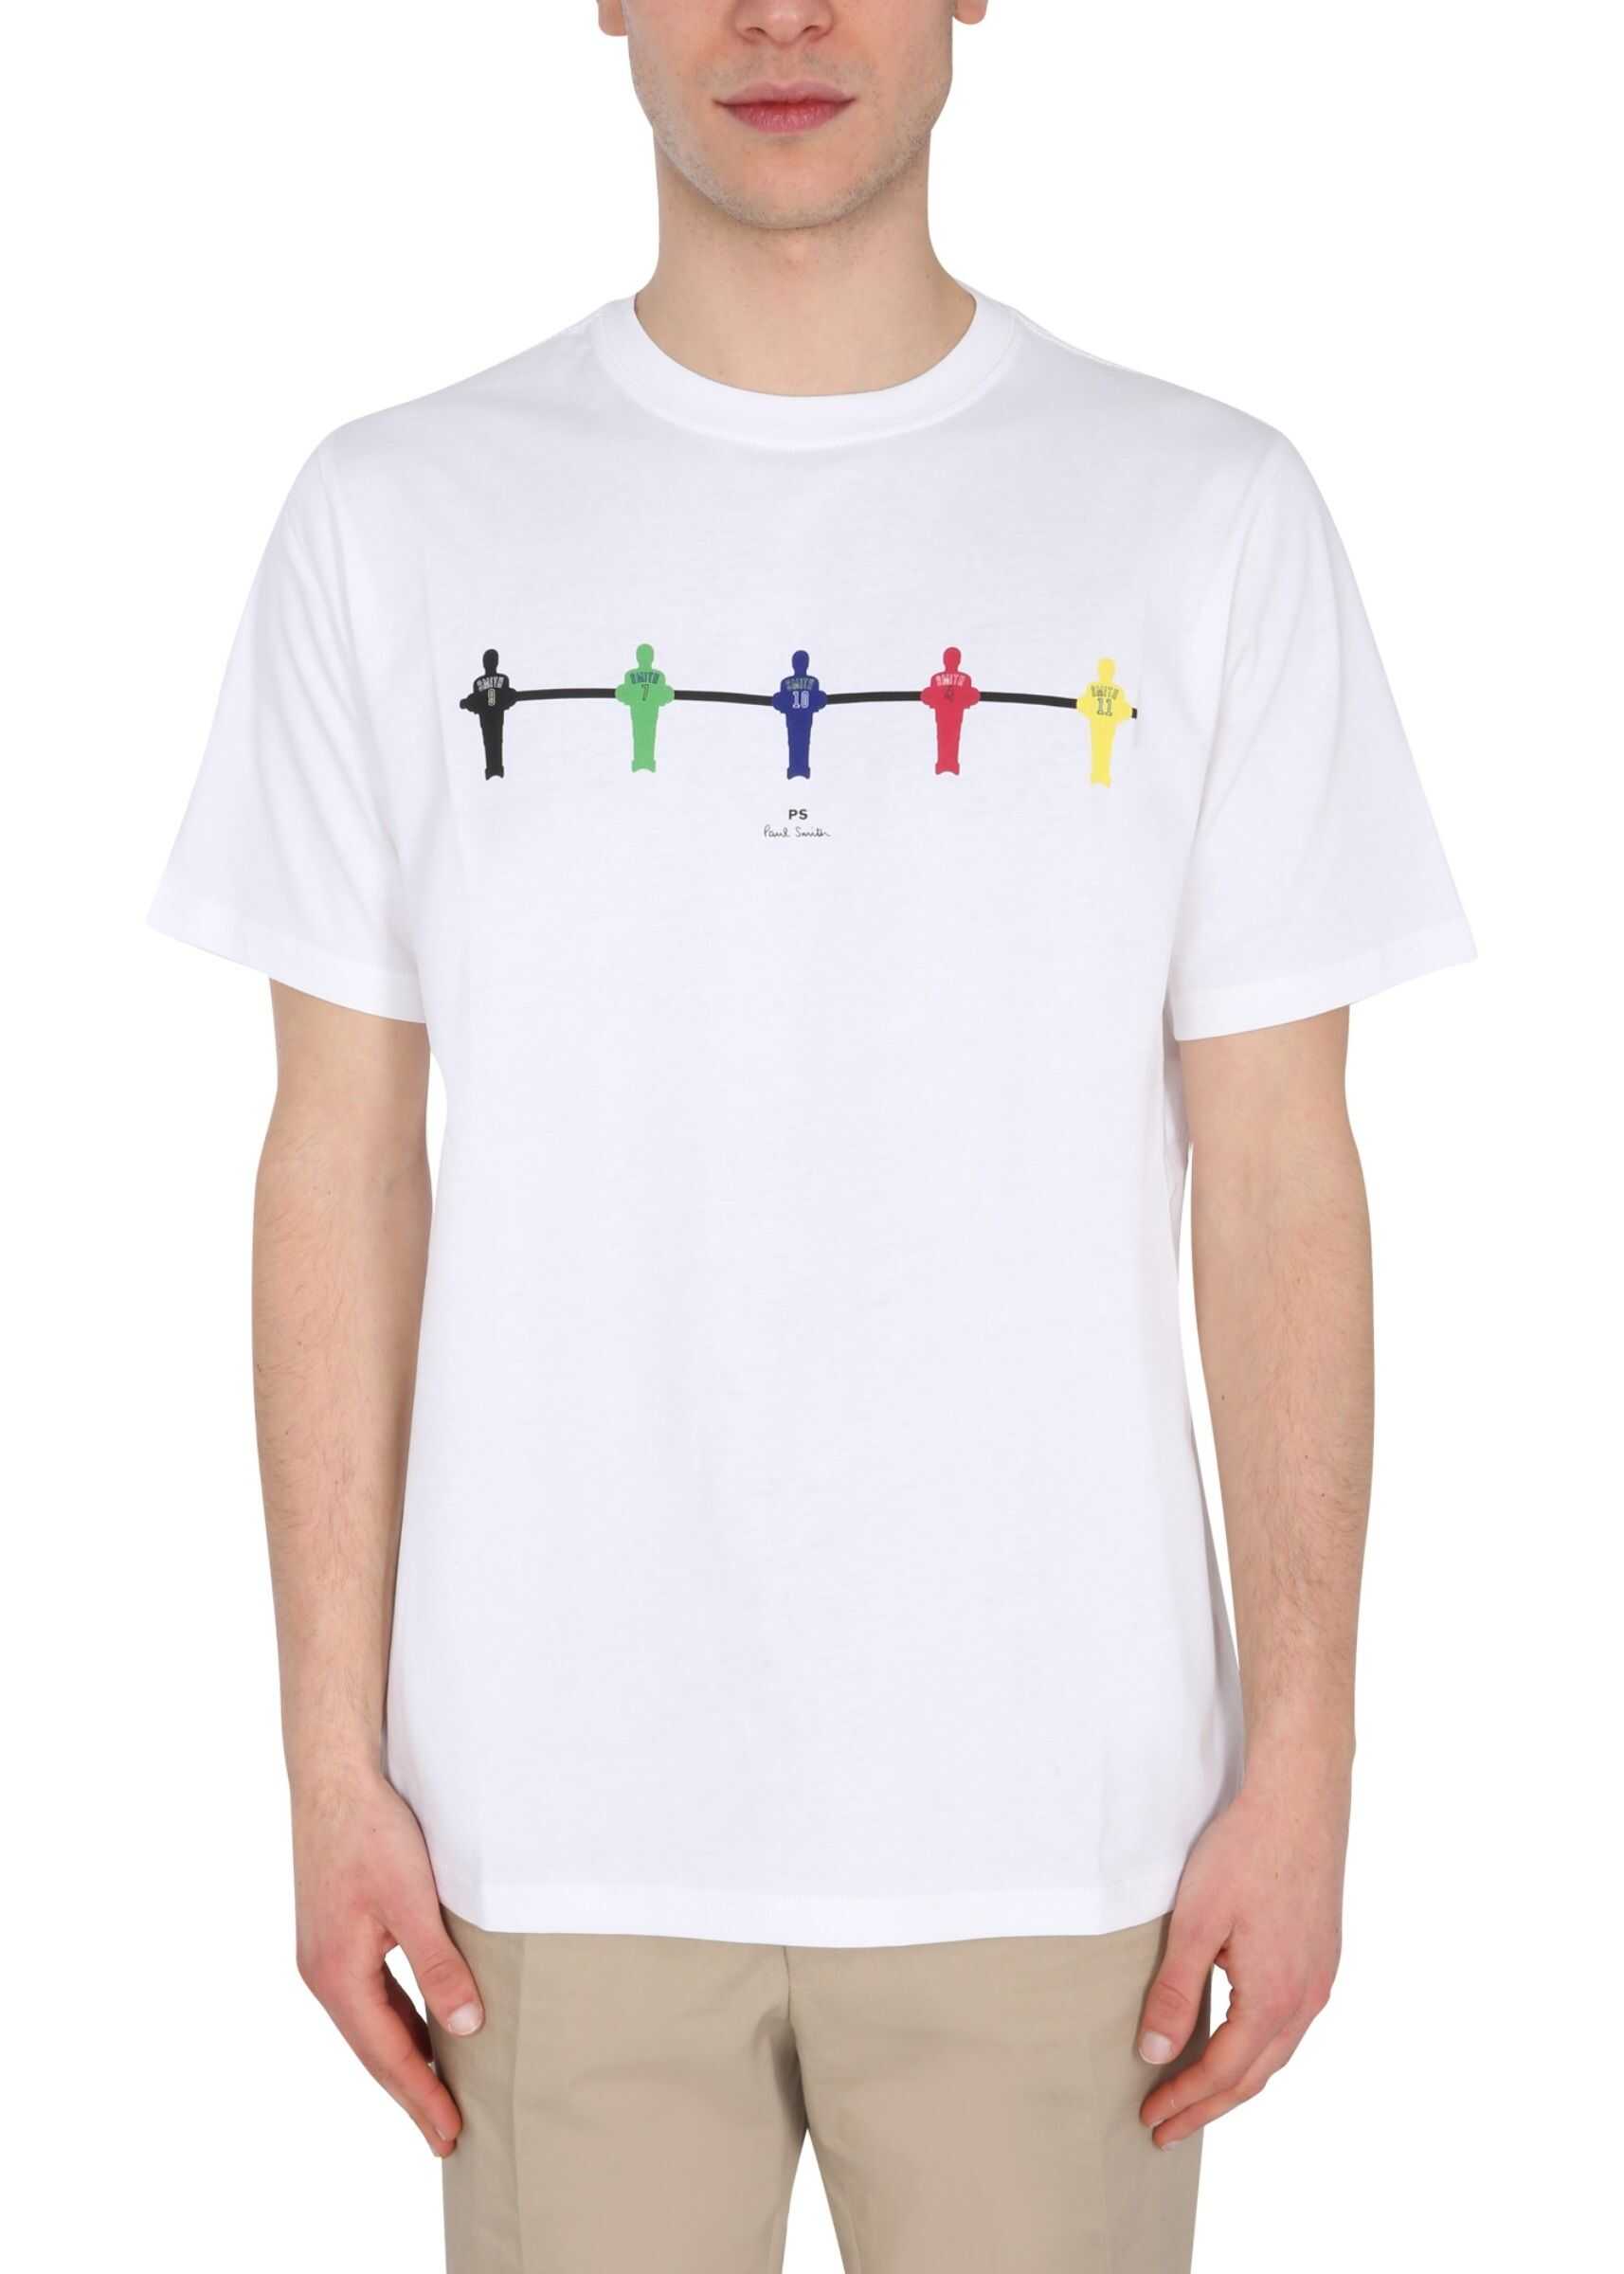 PS by Paul Smith Crew Neck T-Shirt M2R/011R/FP2617_01 WHITE